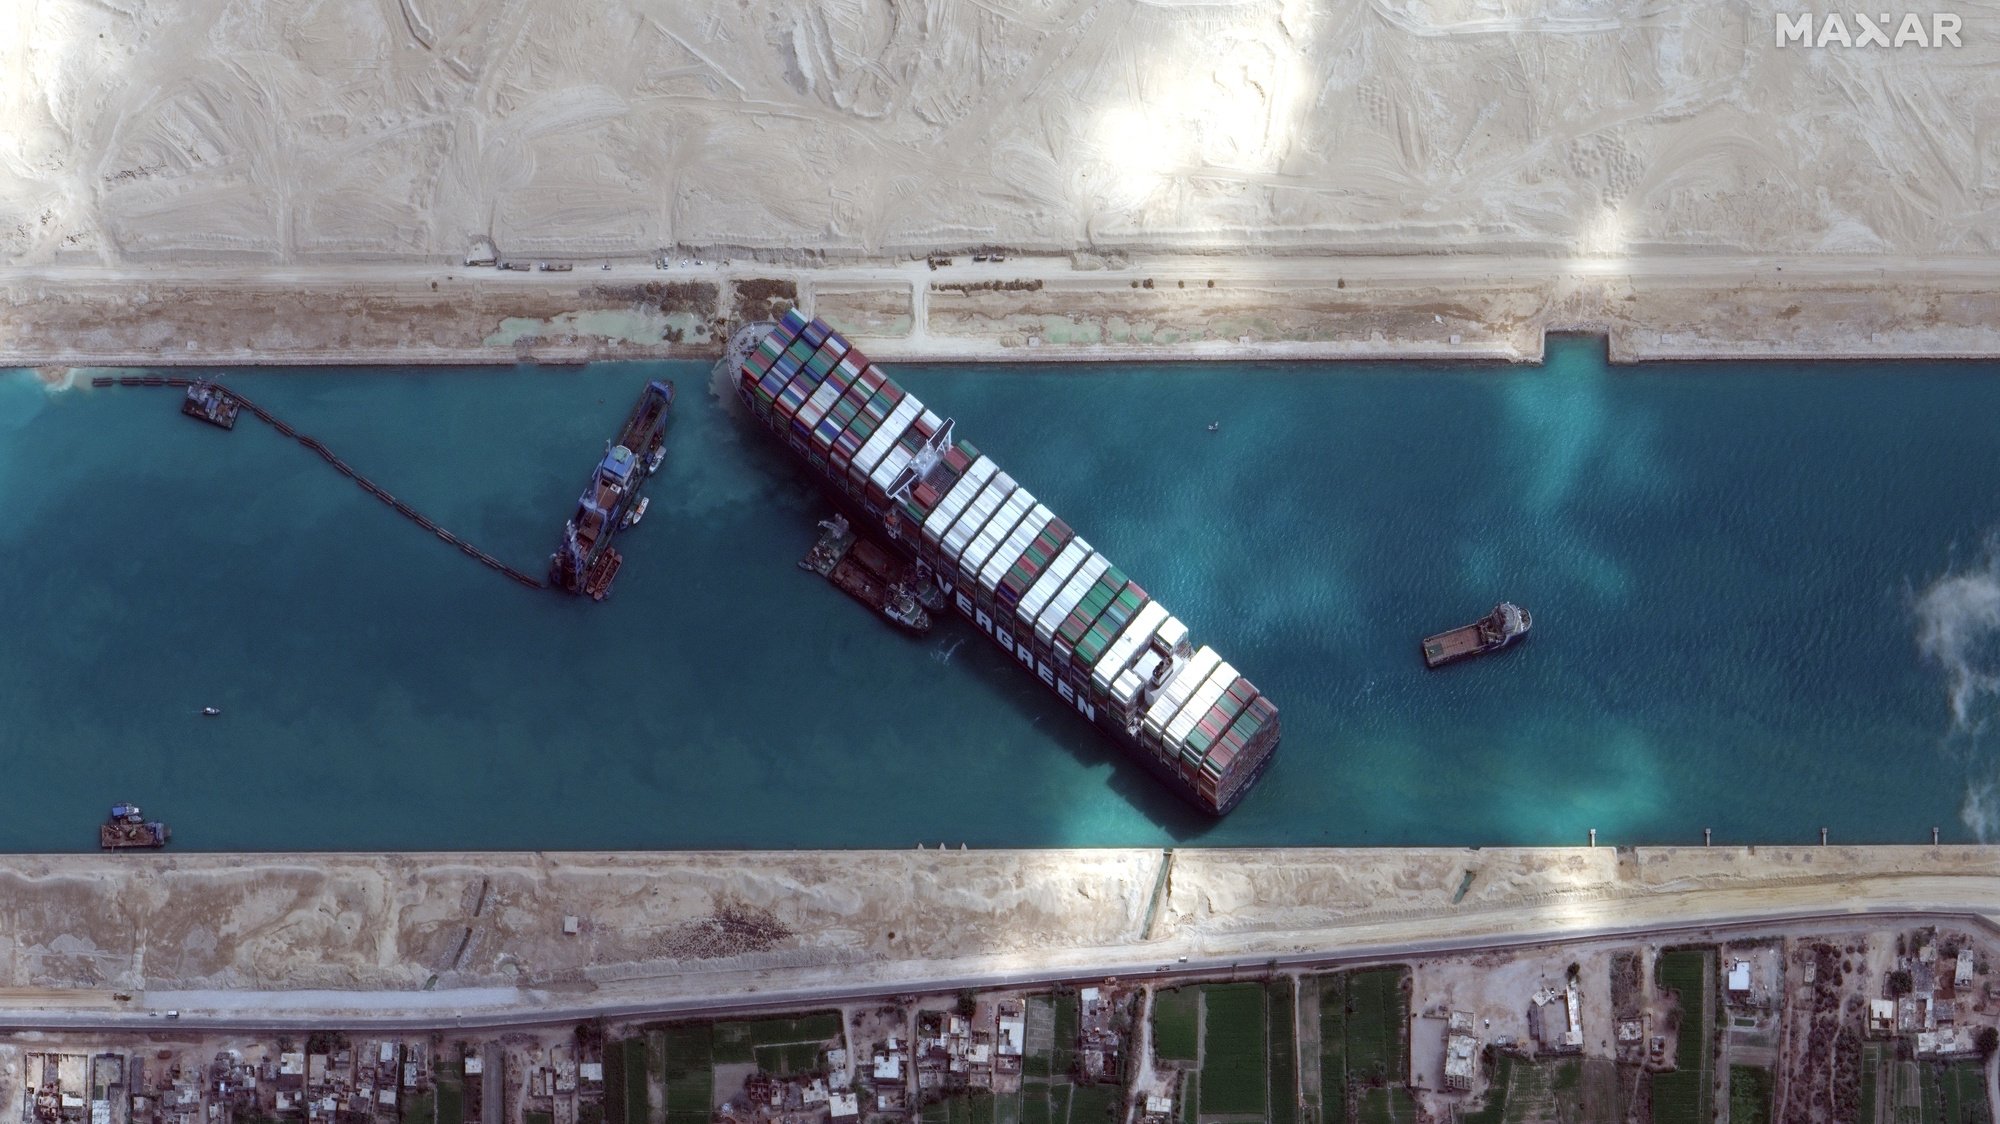 epa09103099 A handout satellite image made available by MAXAR Technologies shows excavation around the bow of the &#039;Ever Given&#039; and dredging operations in progress, in the Suez Canal, Egypt, 28 March 2021. The large container ship Ever Given ran aground in the Suez Canal on 23 March, blocking passage of other ships and causing a traffic jam for cargo vessels.  EPA/MAXAR TECHNOLOGIES HANDOUT MANDATORY CREDIT: SATELLITE IMAGE 2020 MAXAR TECHNOLOGIES -- the watermark may not be removed/cropped -- HANDOUT EDITORIAL USE ONLY/NO SALES